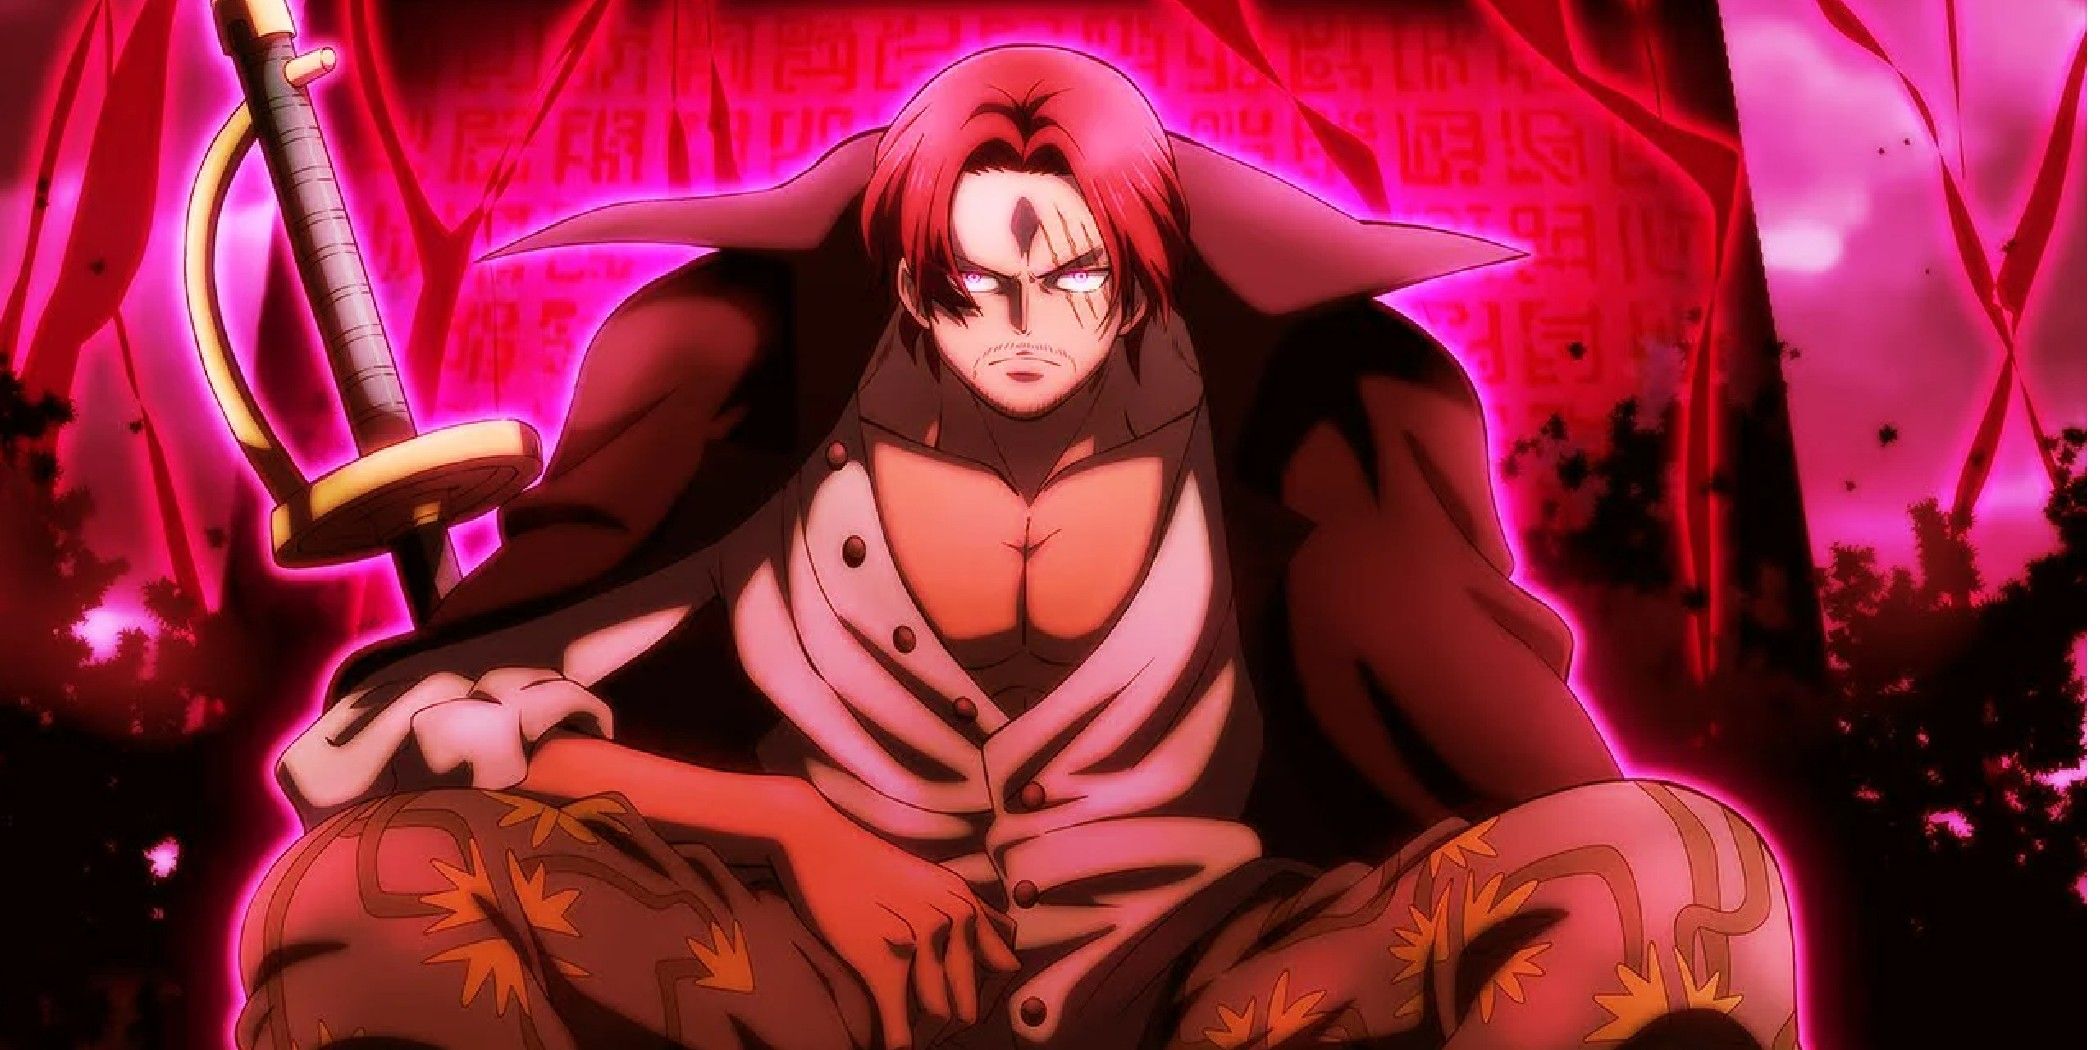 Shanks using his Haki in One Piece sitting down in front of a red road poneglyph looking angry